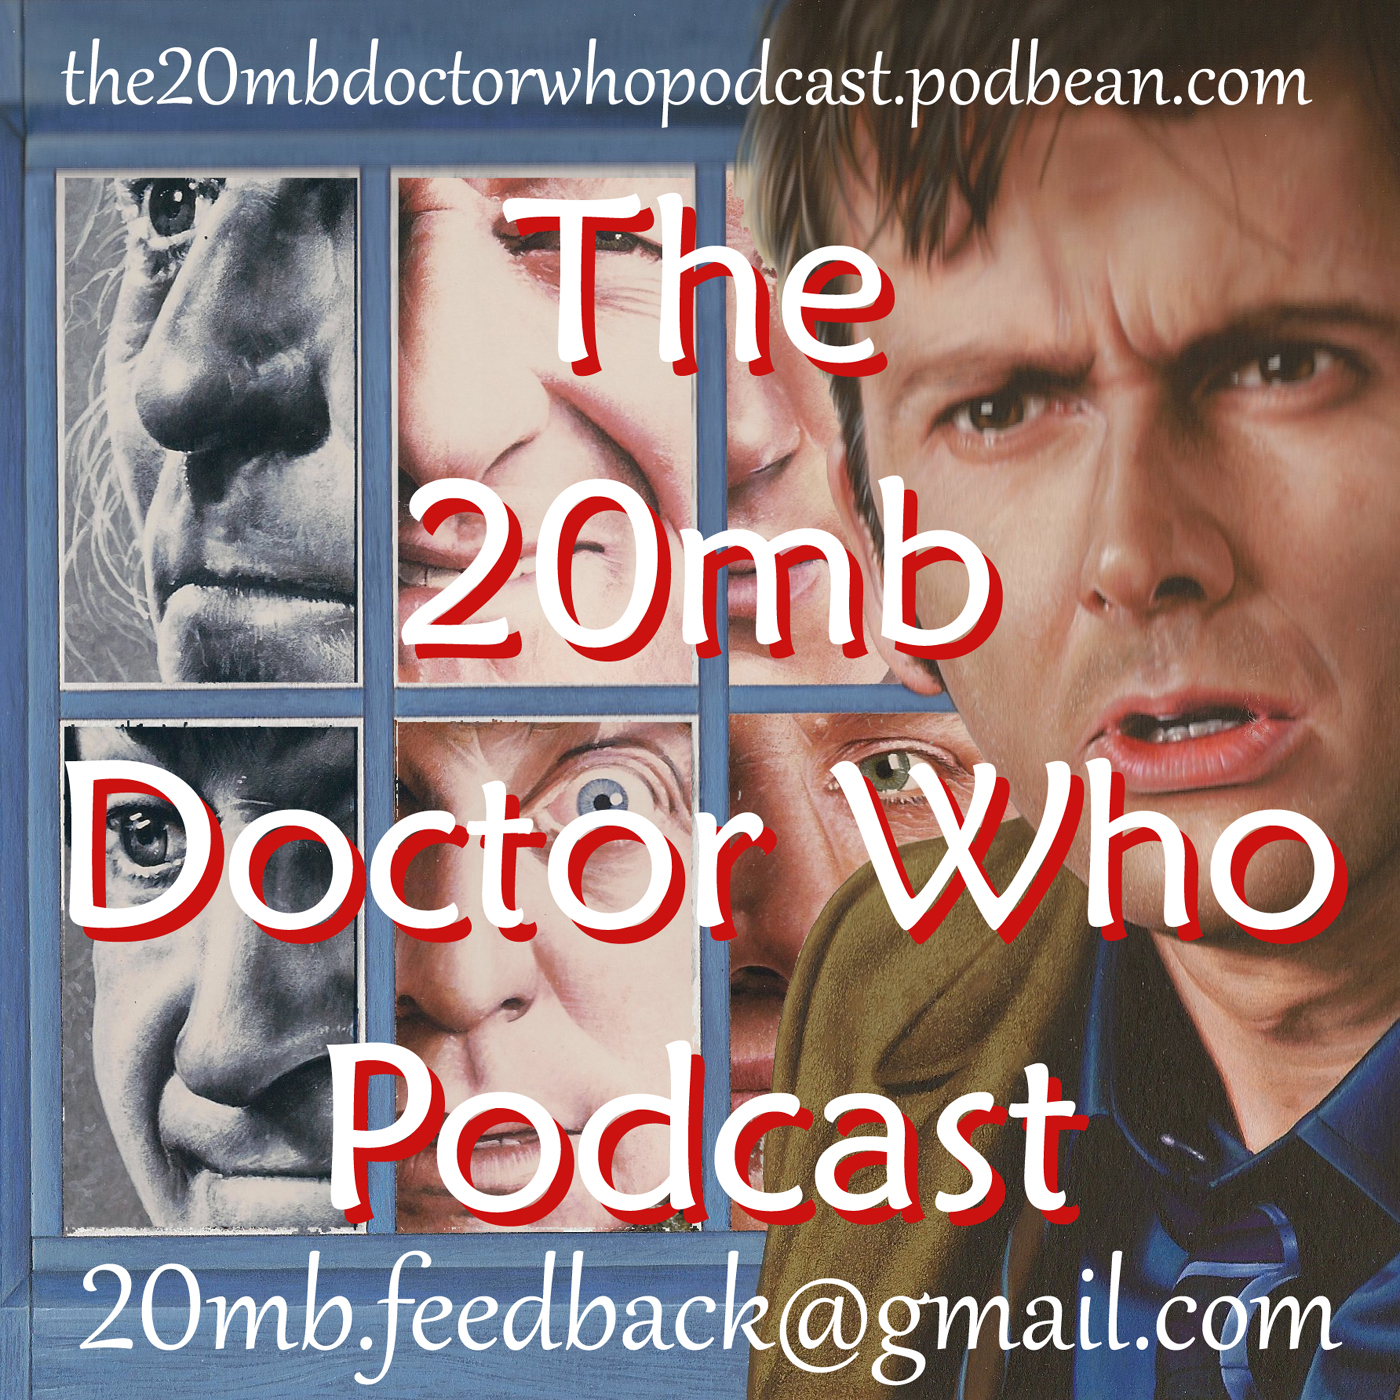 The 20mb Doctor Who Podcast #153